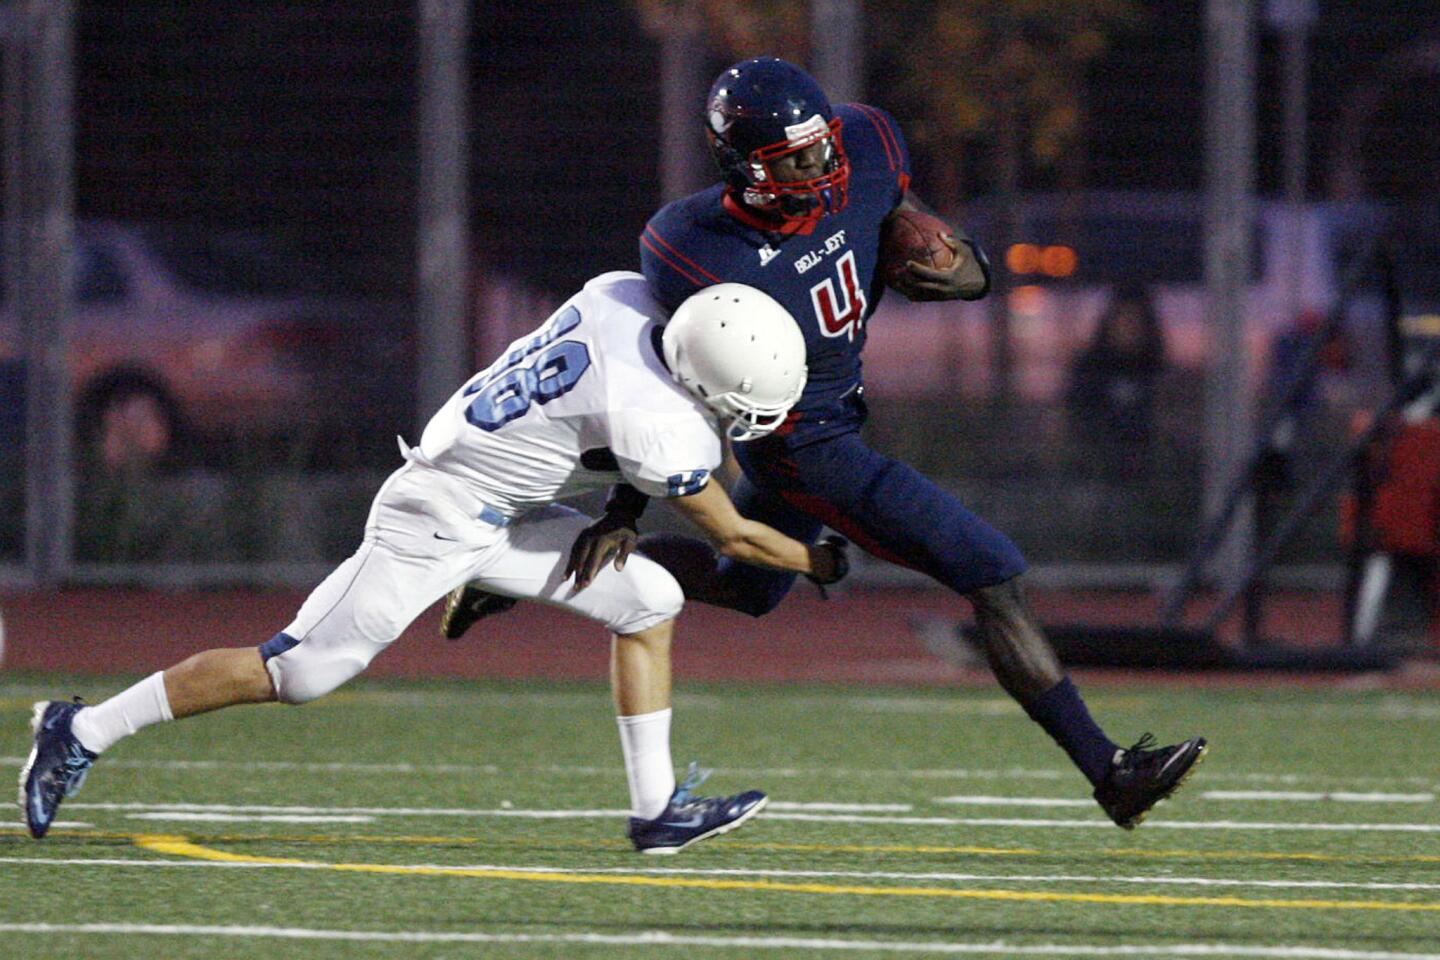 Chadwick's Cameron Bartlett, left, tackles Bell-Jeff's Jalen Henry during a game at John Burroughs High School in Burbank on Saturday, September 22, 2012.